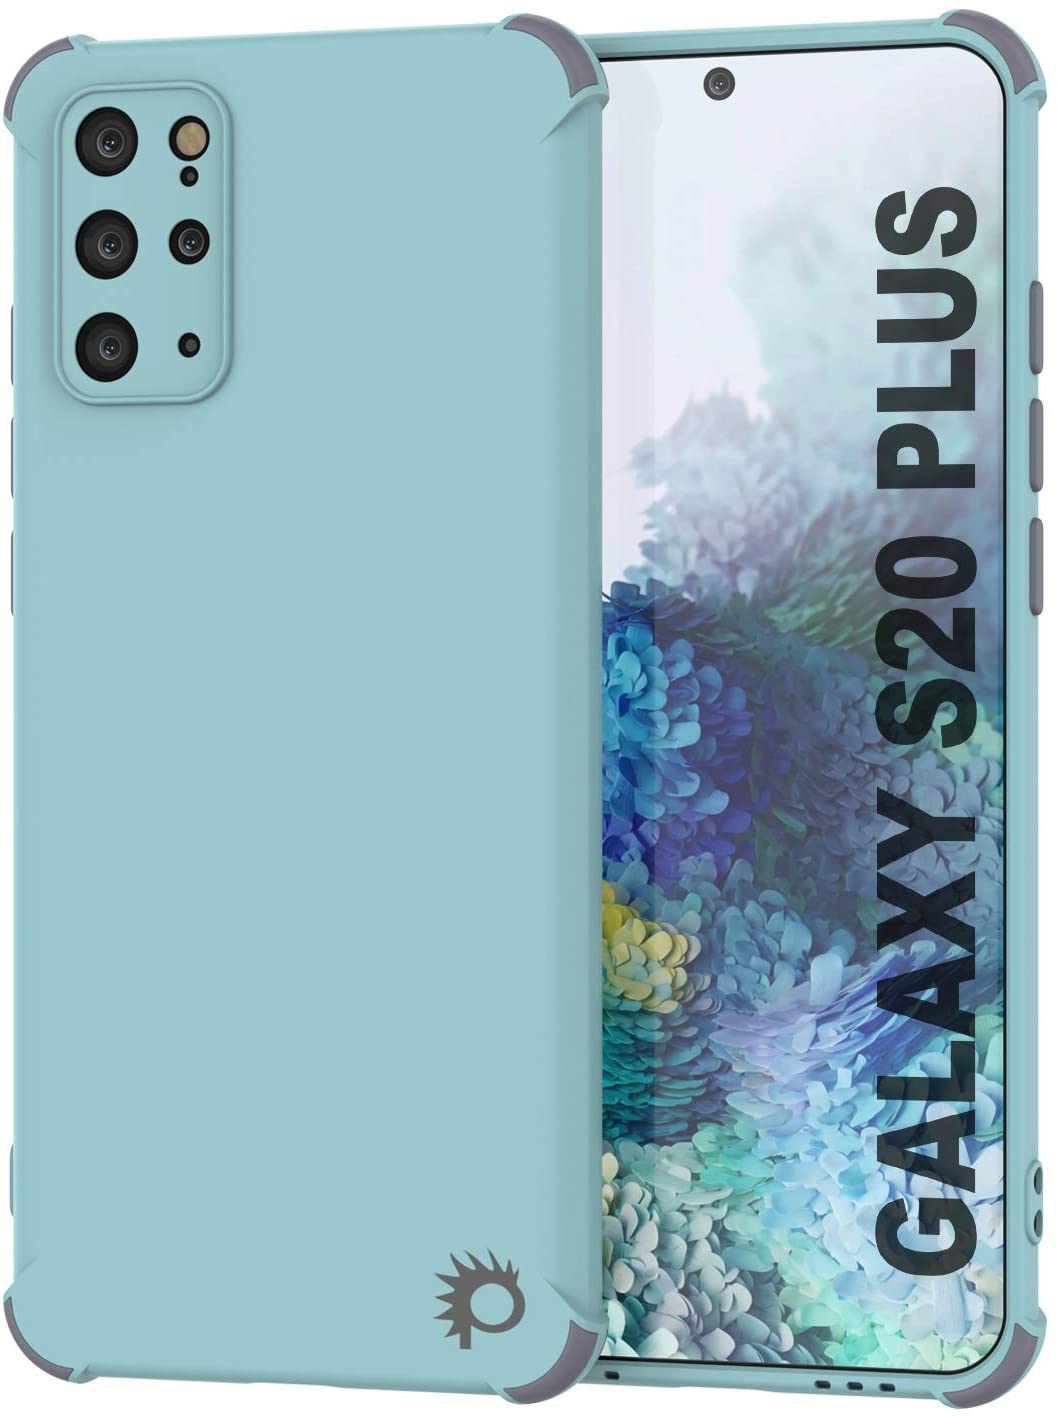 Punkcase Protective & Lightweight TPU Case [Sunshine Series] for Galaxy S20+ Plus [Teal]